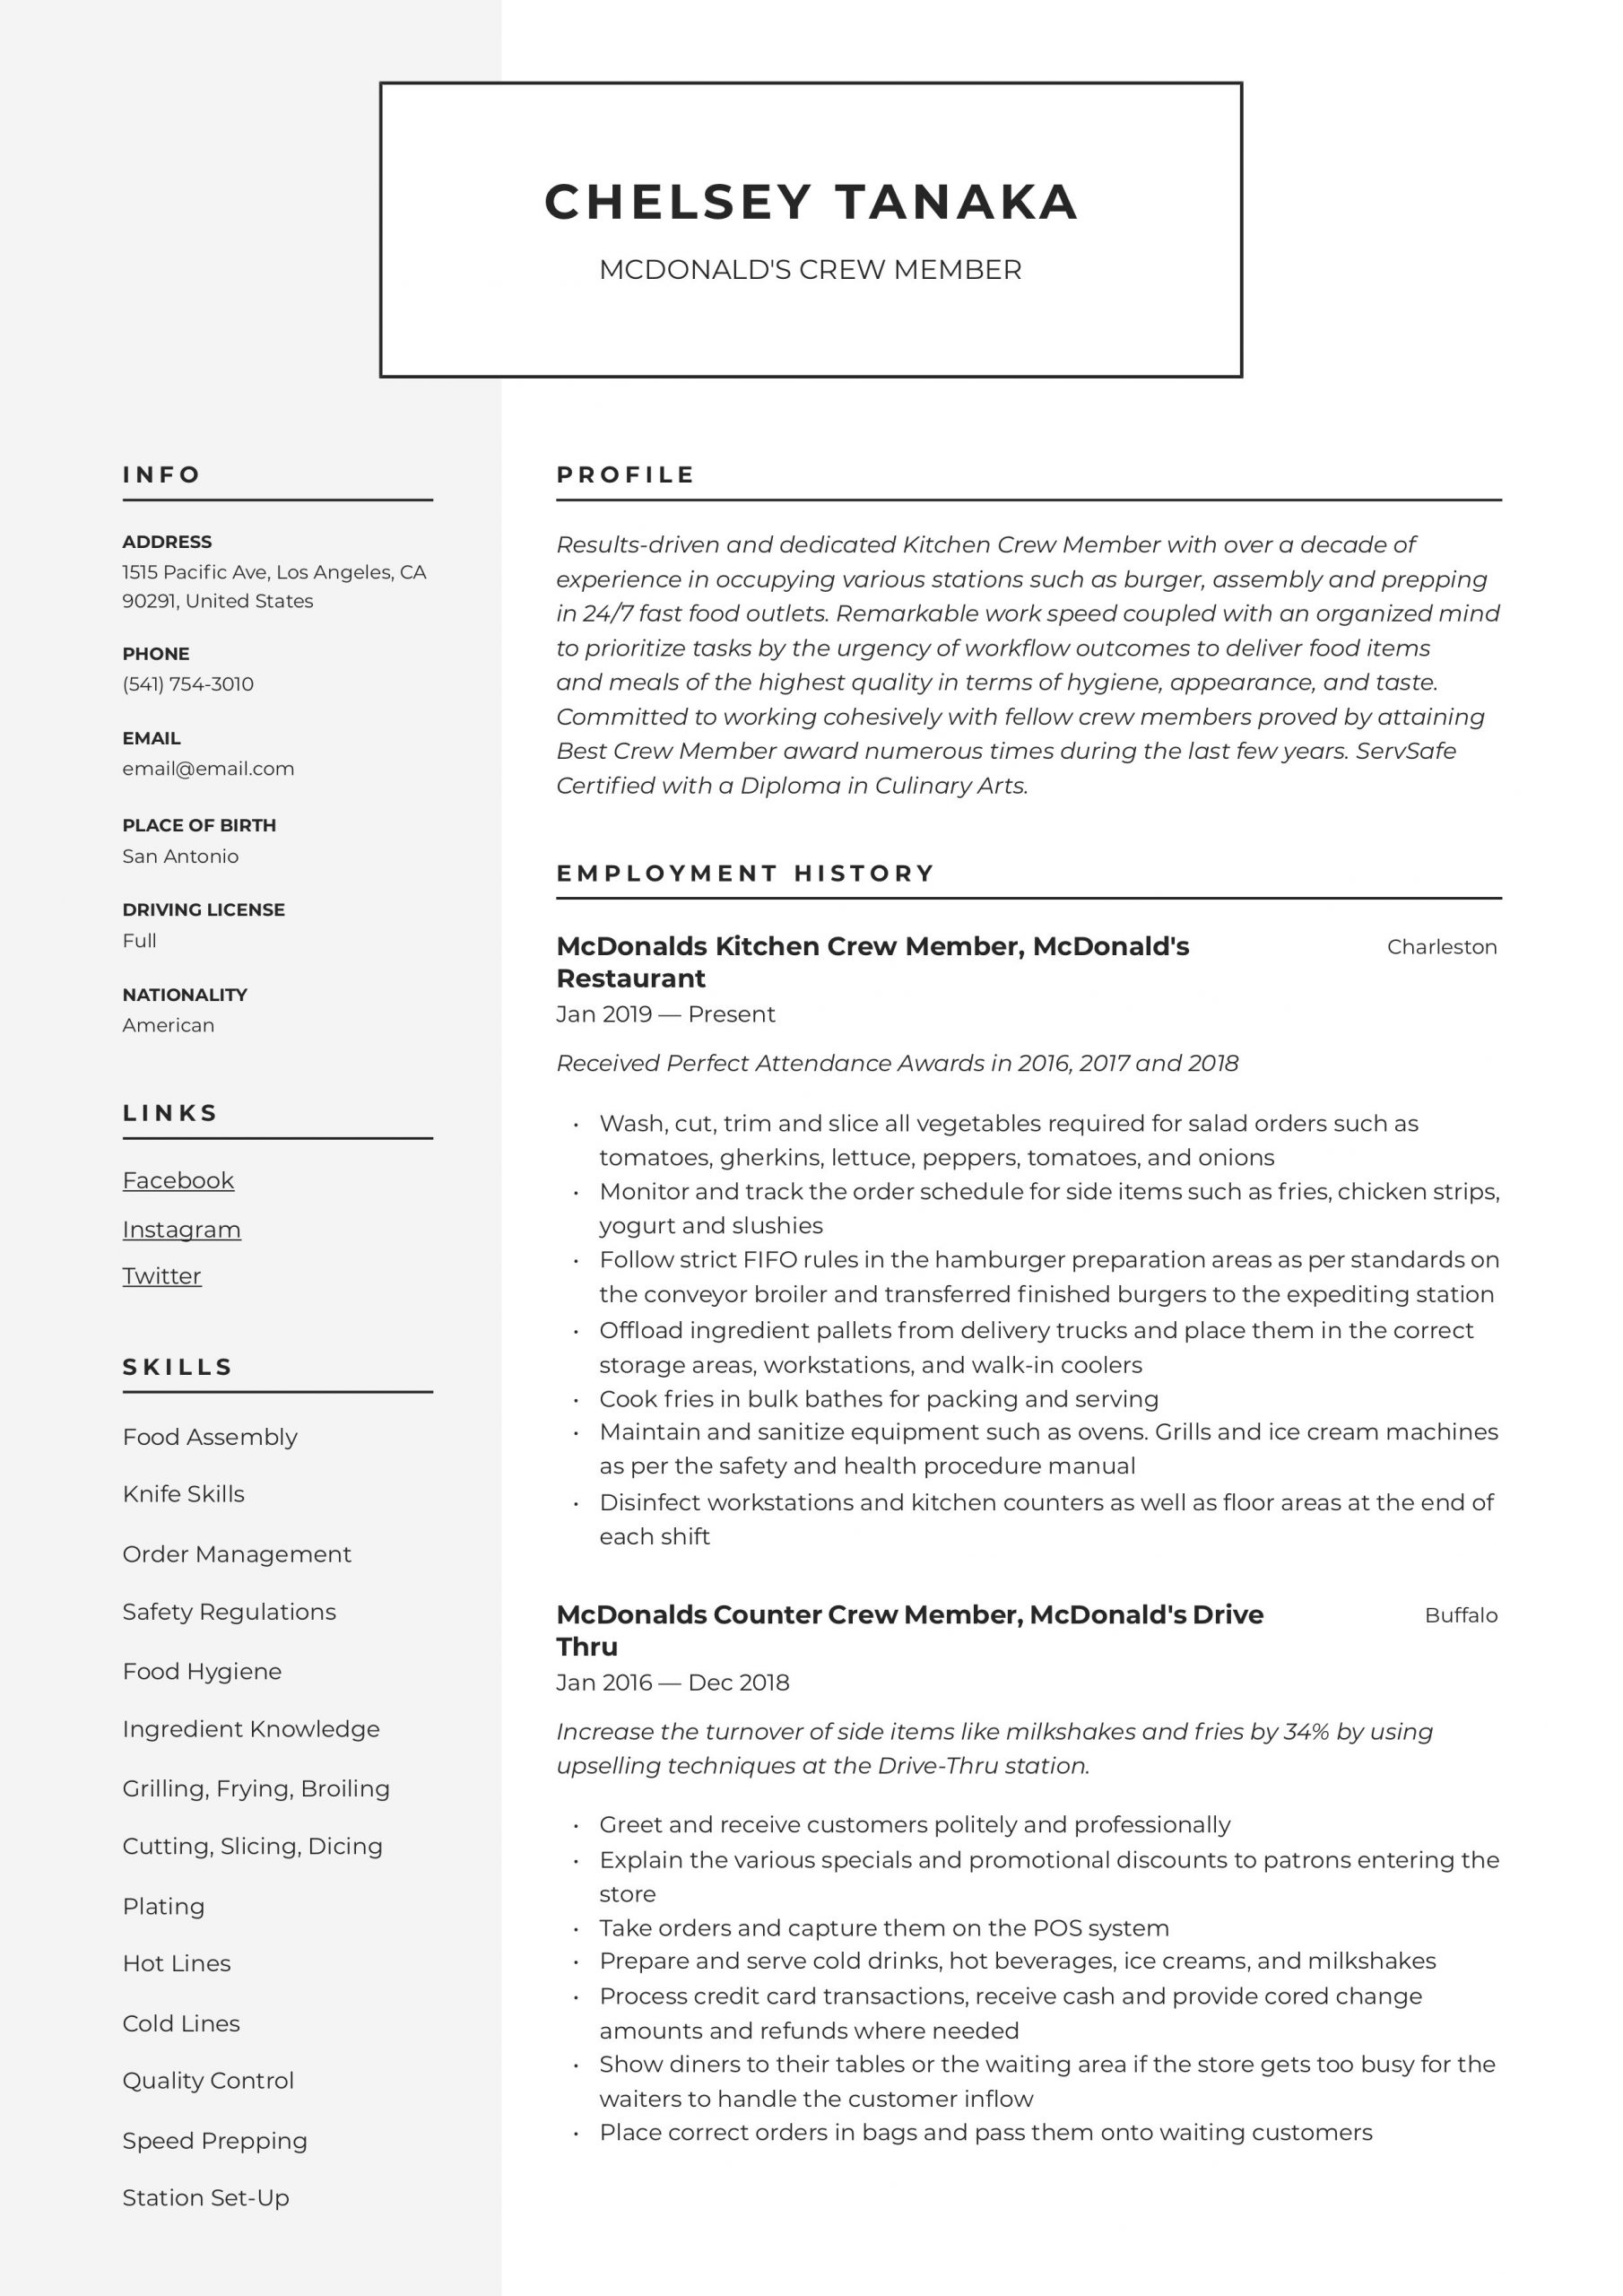 Resume Sample Objective for Service Crew Mcdonalds Crew Member Resume & Writing Guide  12 Examples 2020